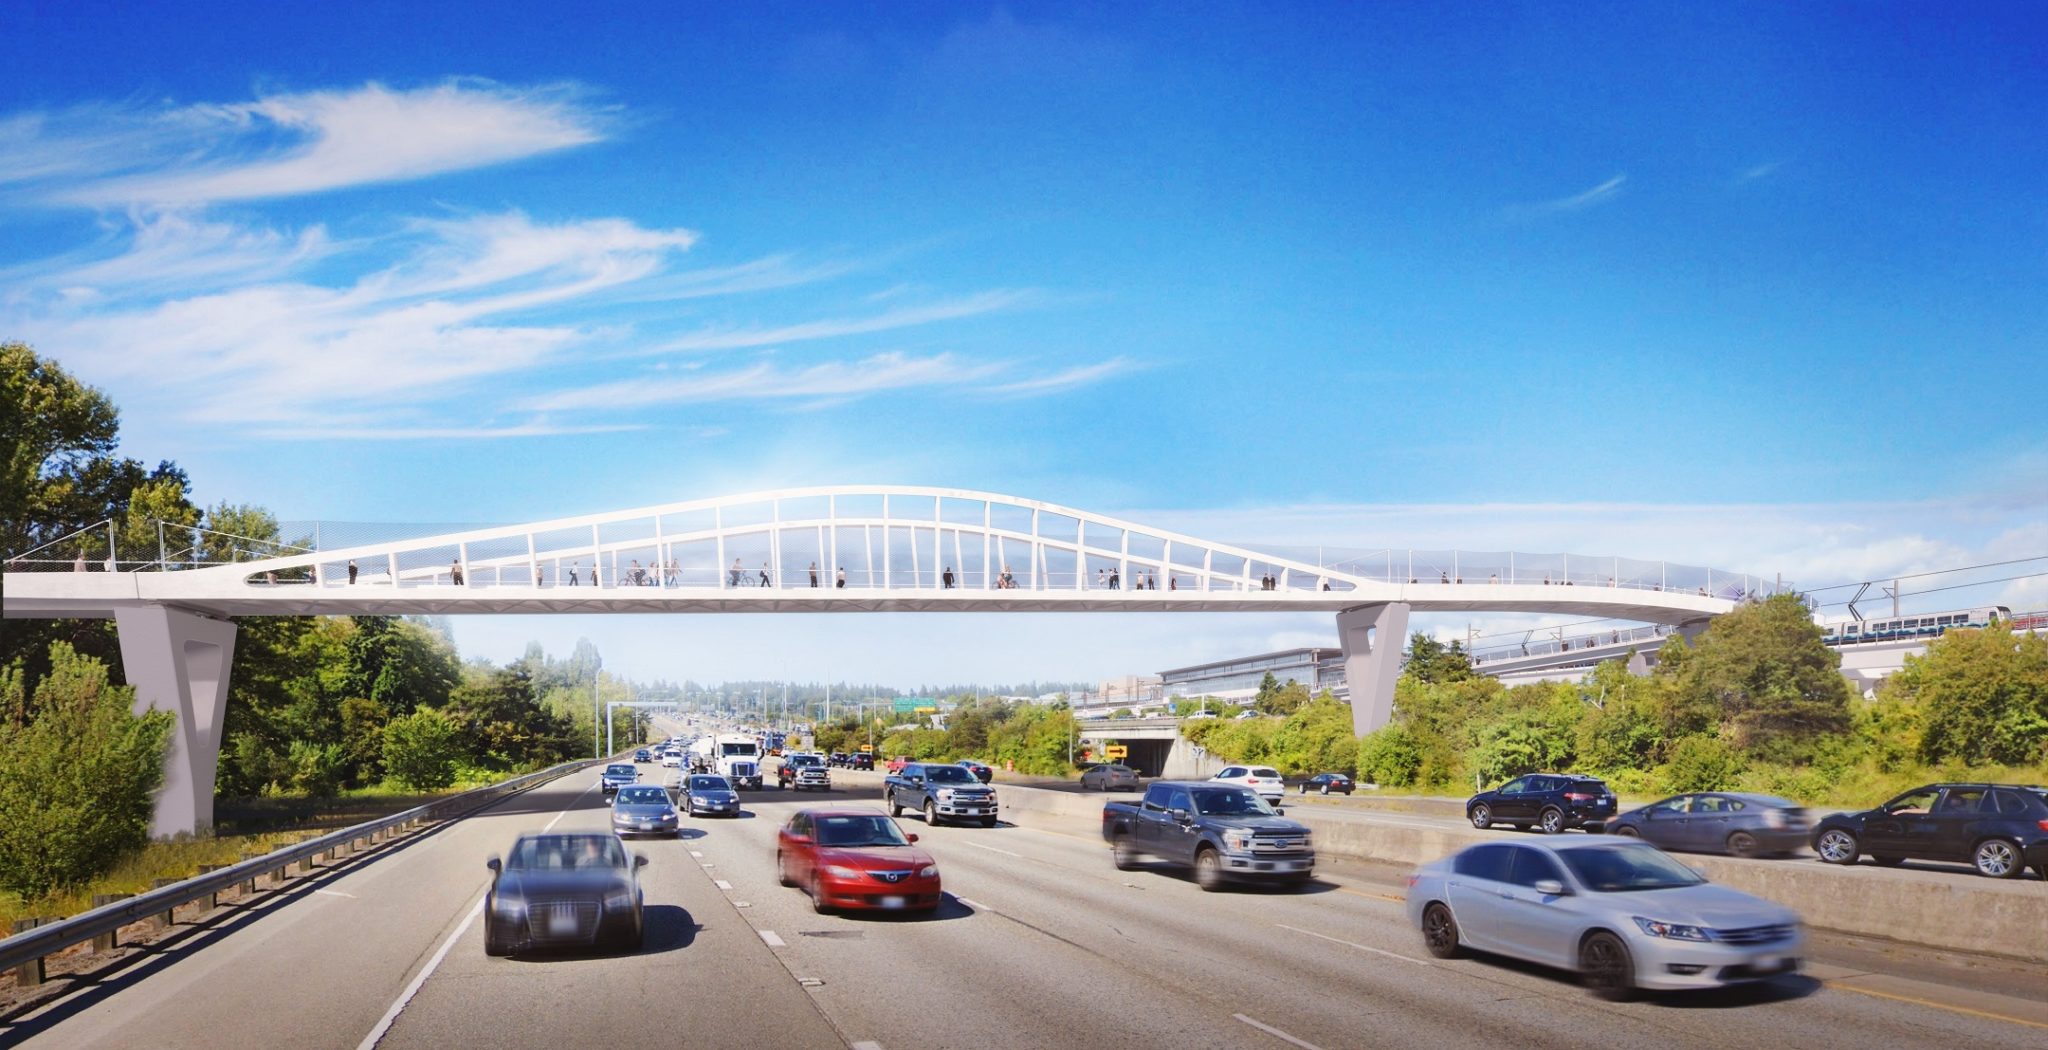 An artist's rendering of the new John Lewis Memorial Bridge in North Seattle. The bridge is visible in the upper center of the photo, full of pedestrians, cyclists, and people rolling. Vehicular traffic continues to flow on I-5 below, in the image's foreground.